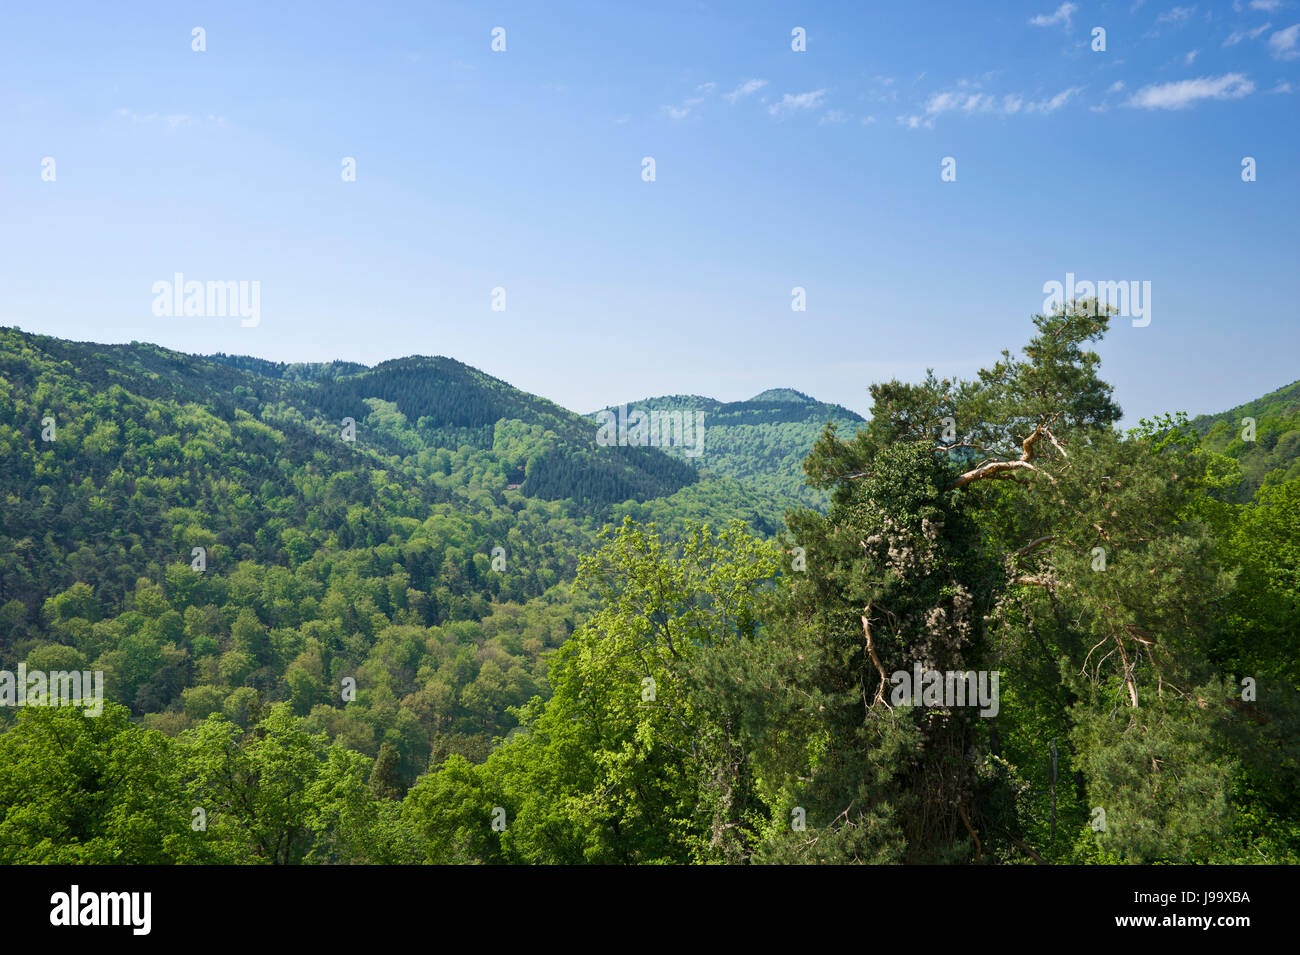 europe, woods, forested, german, natural preserve, pfalz, southerly, germany, Stock Photo